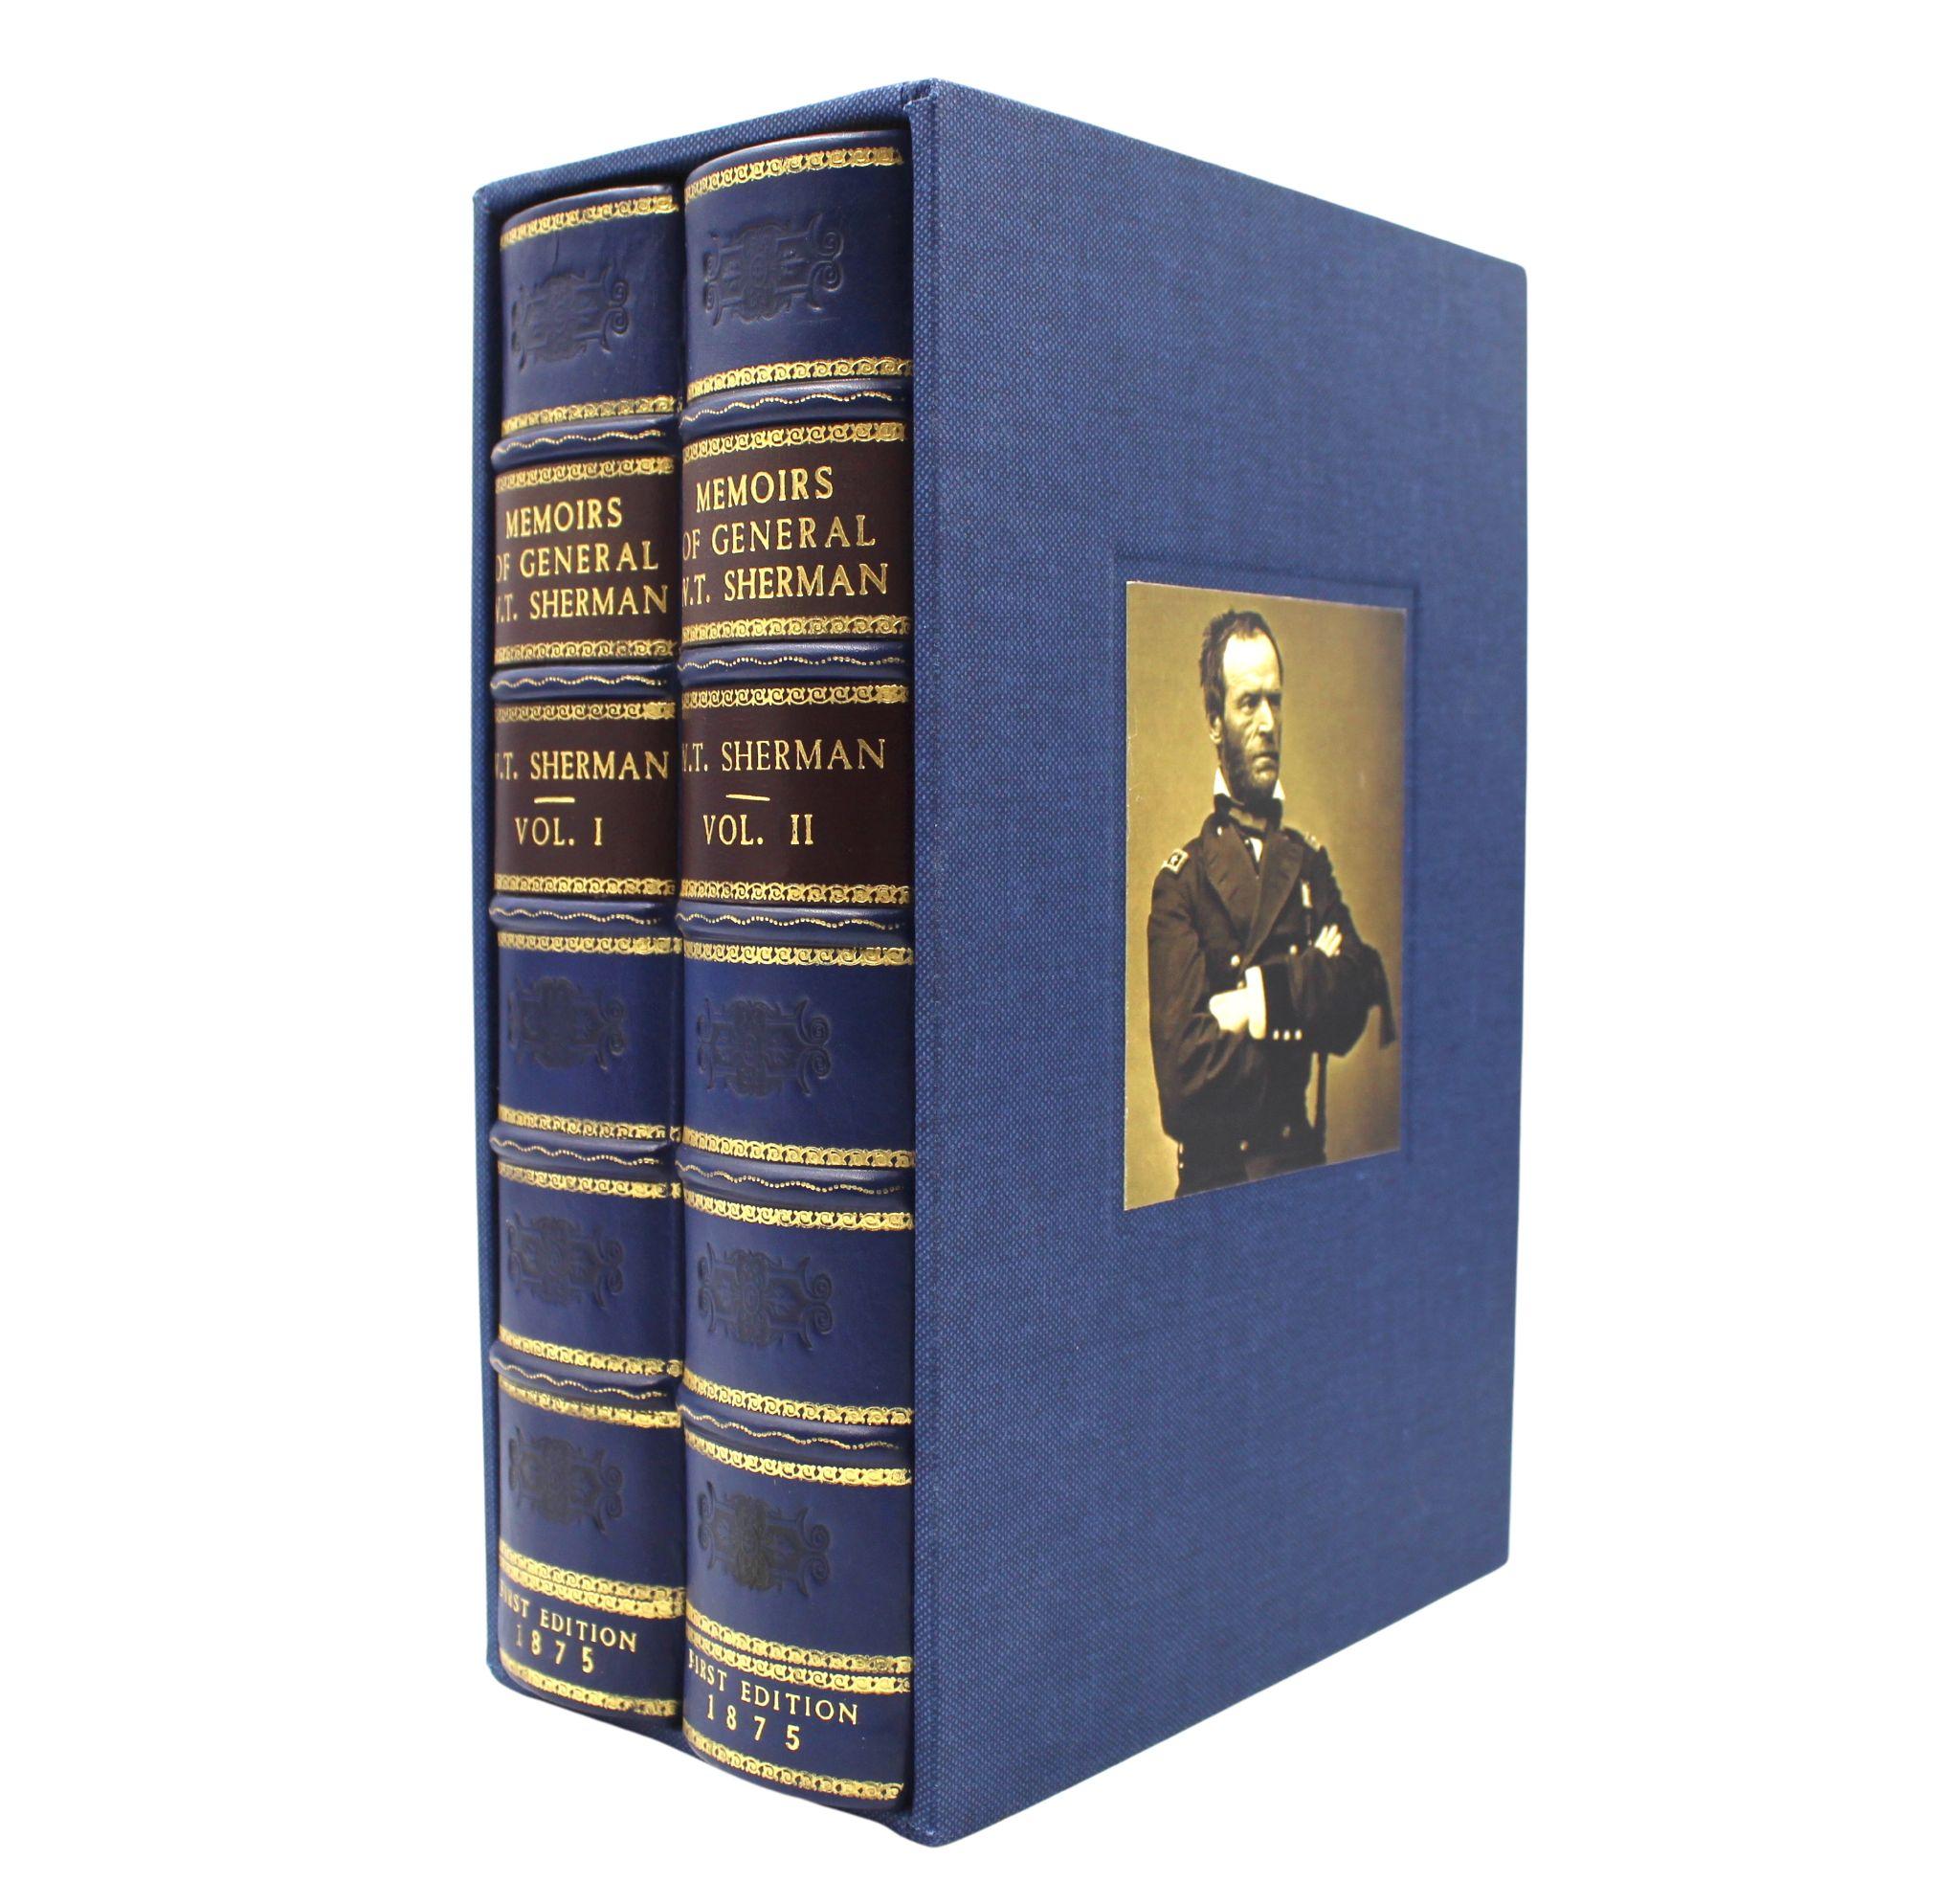 Sherman, William T. Memoirs of General W. T. Sherman, Written By Himself. New York: D. Appleton and Company, 1875. First edition. In two volumes. Rebound in quarter blue leather and cloth boards, with raised bands, gilt tooling, and gilt titles to